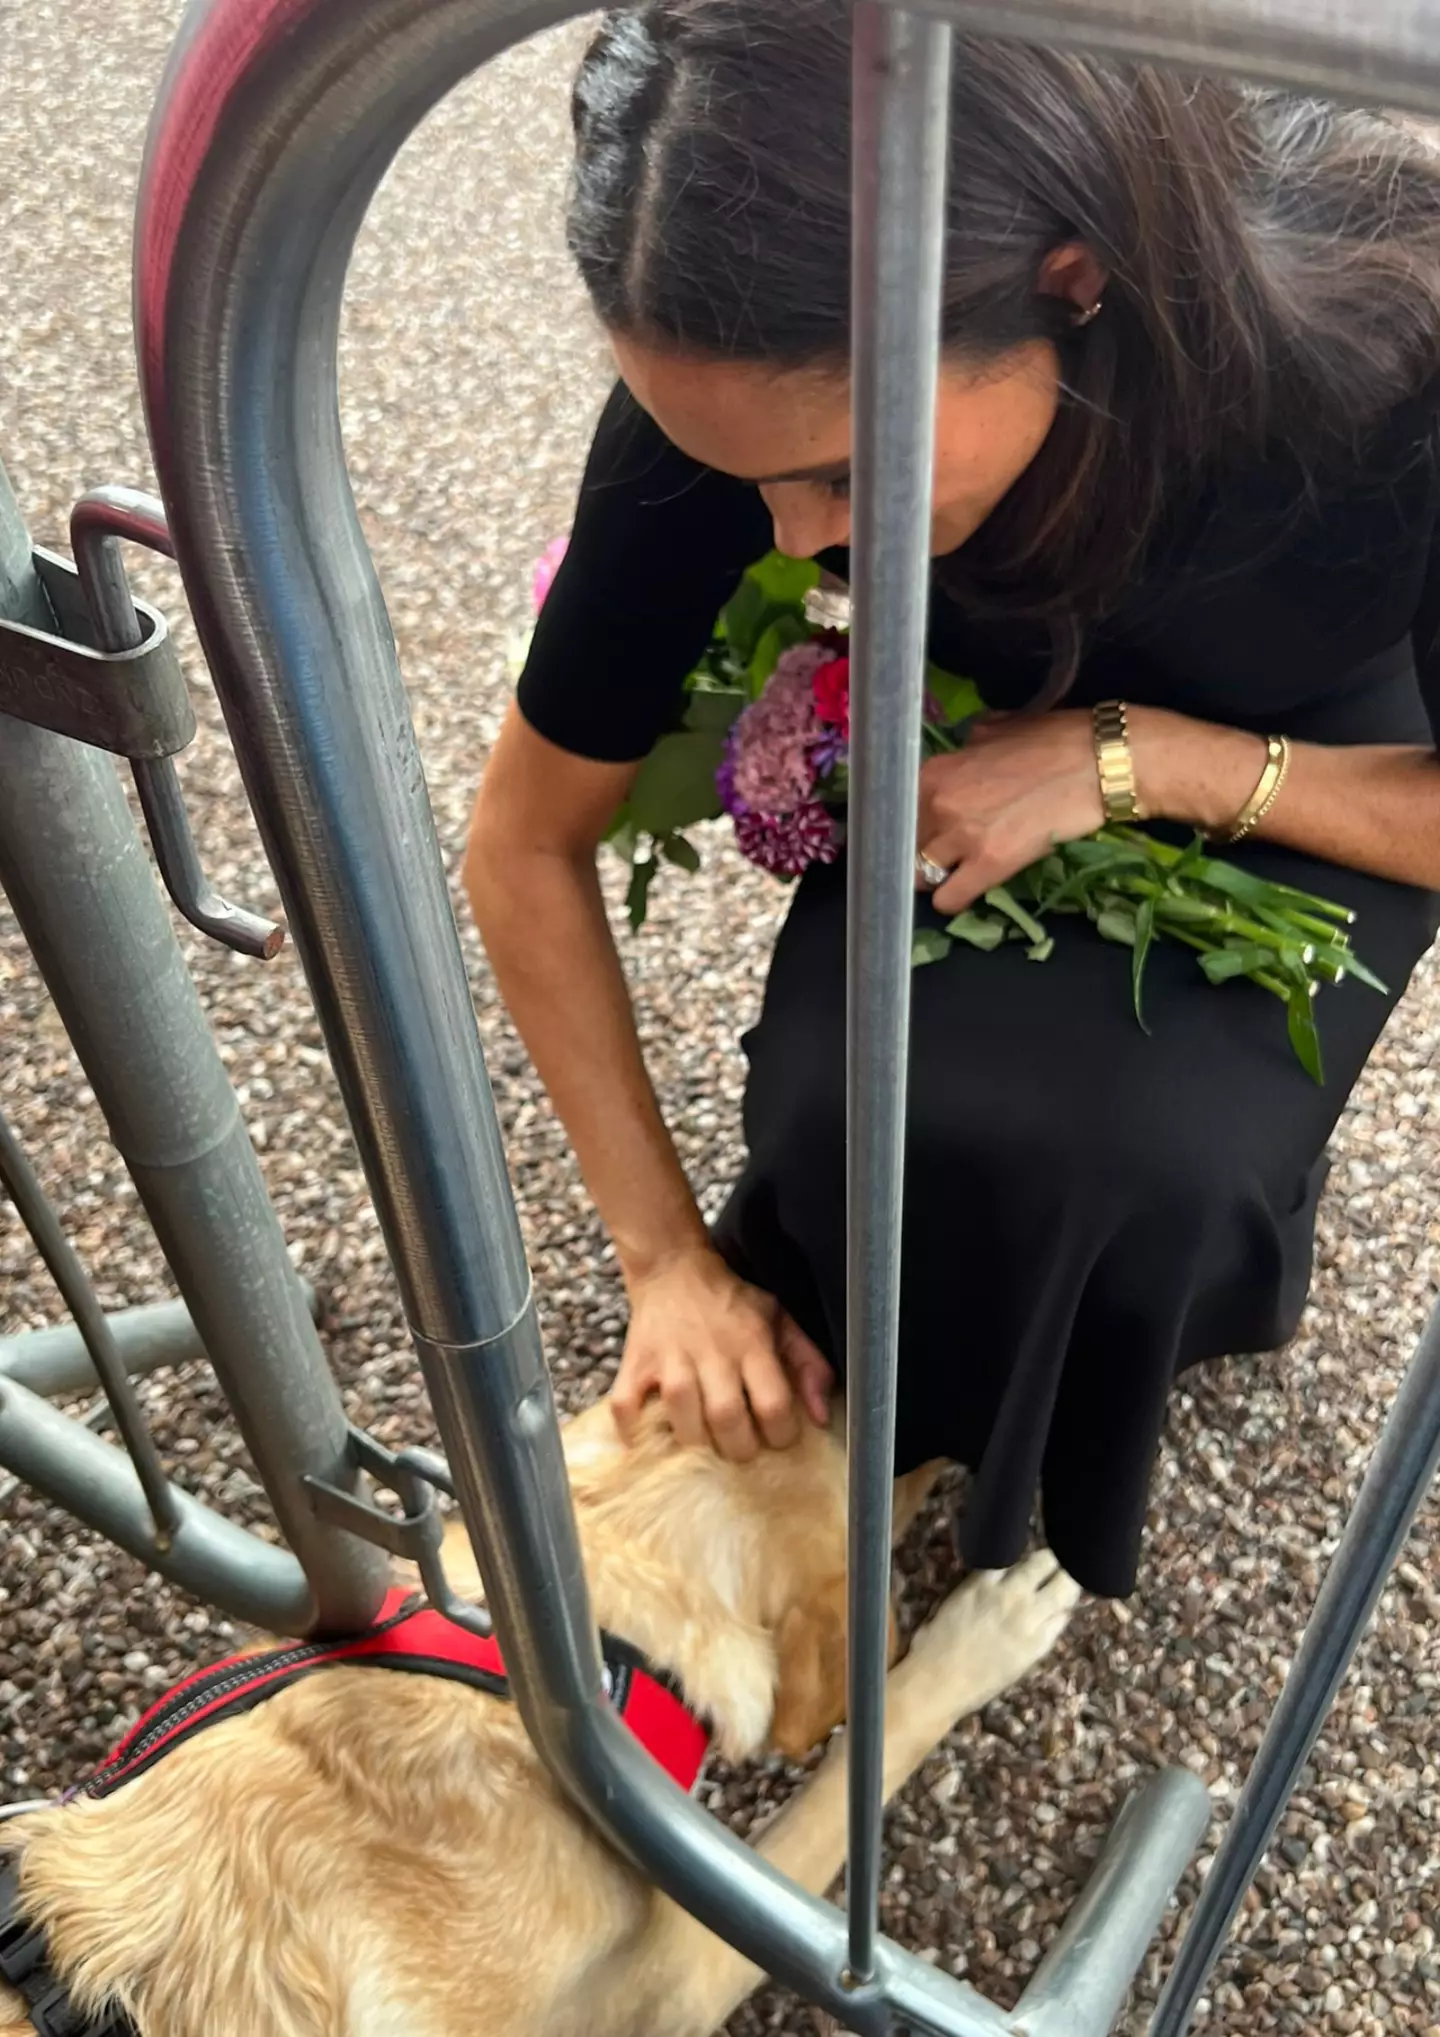 Meghan and Harry both spent some time with Sarah's Labrador pup.